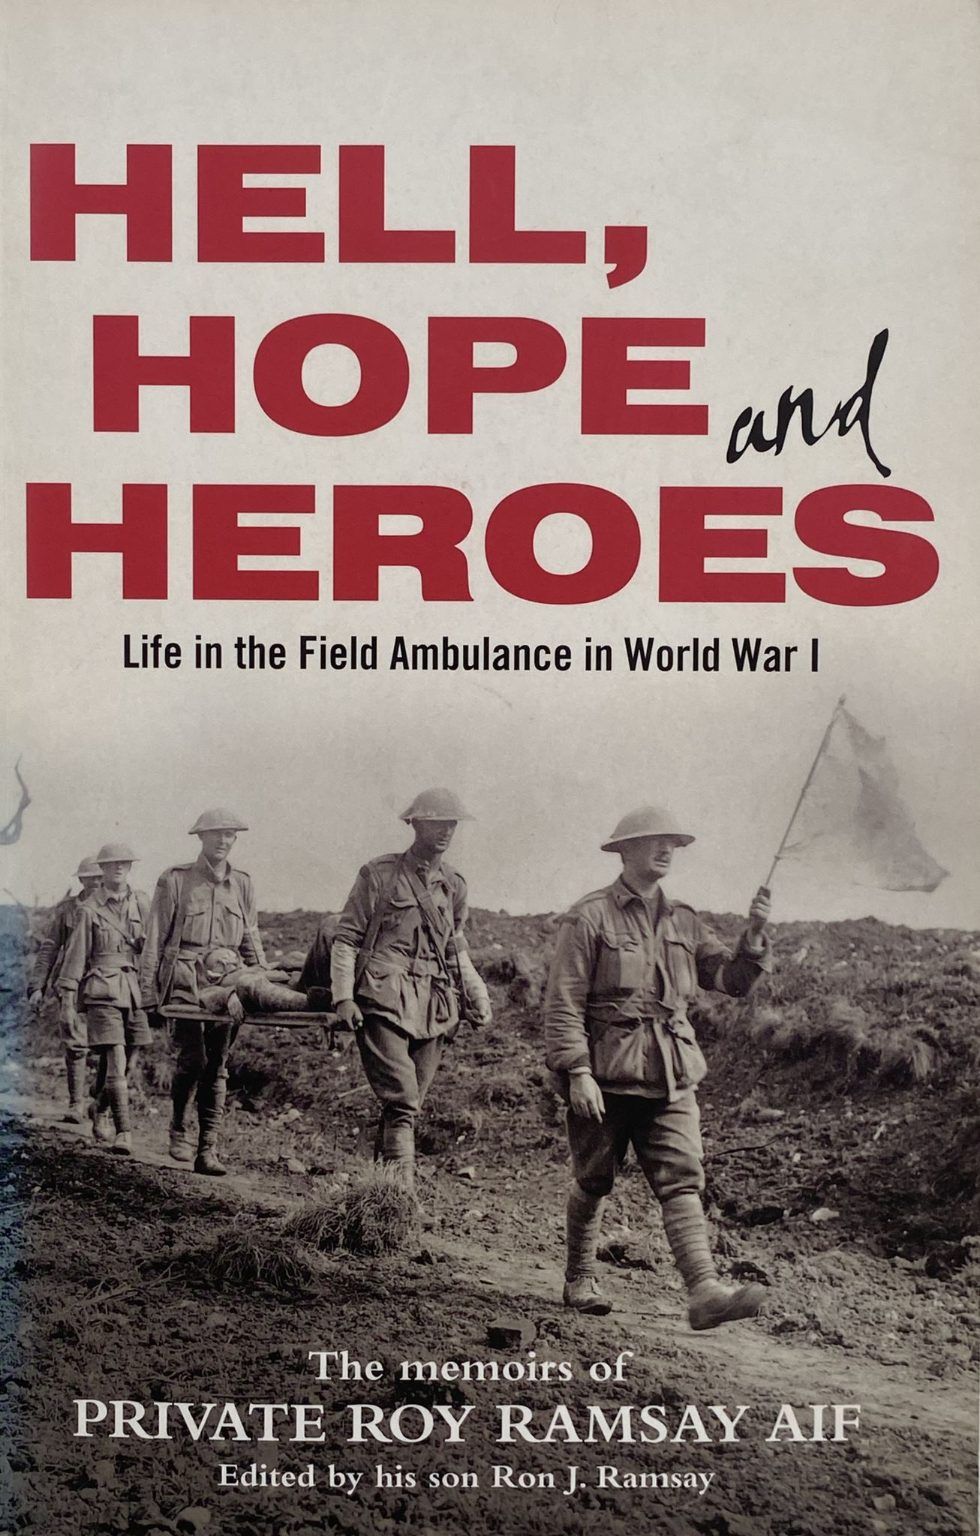 HELL, HOPE and HEROES: Life in the Field Ambulance in World War 1